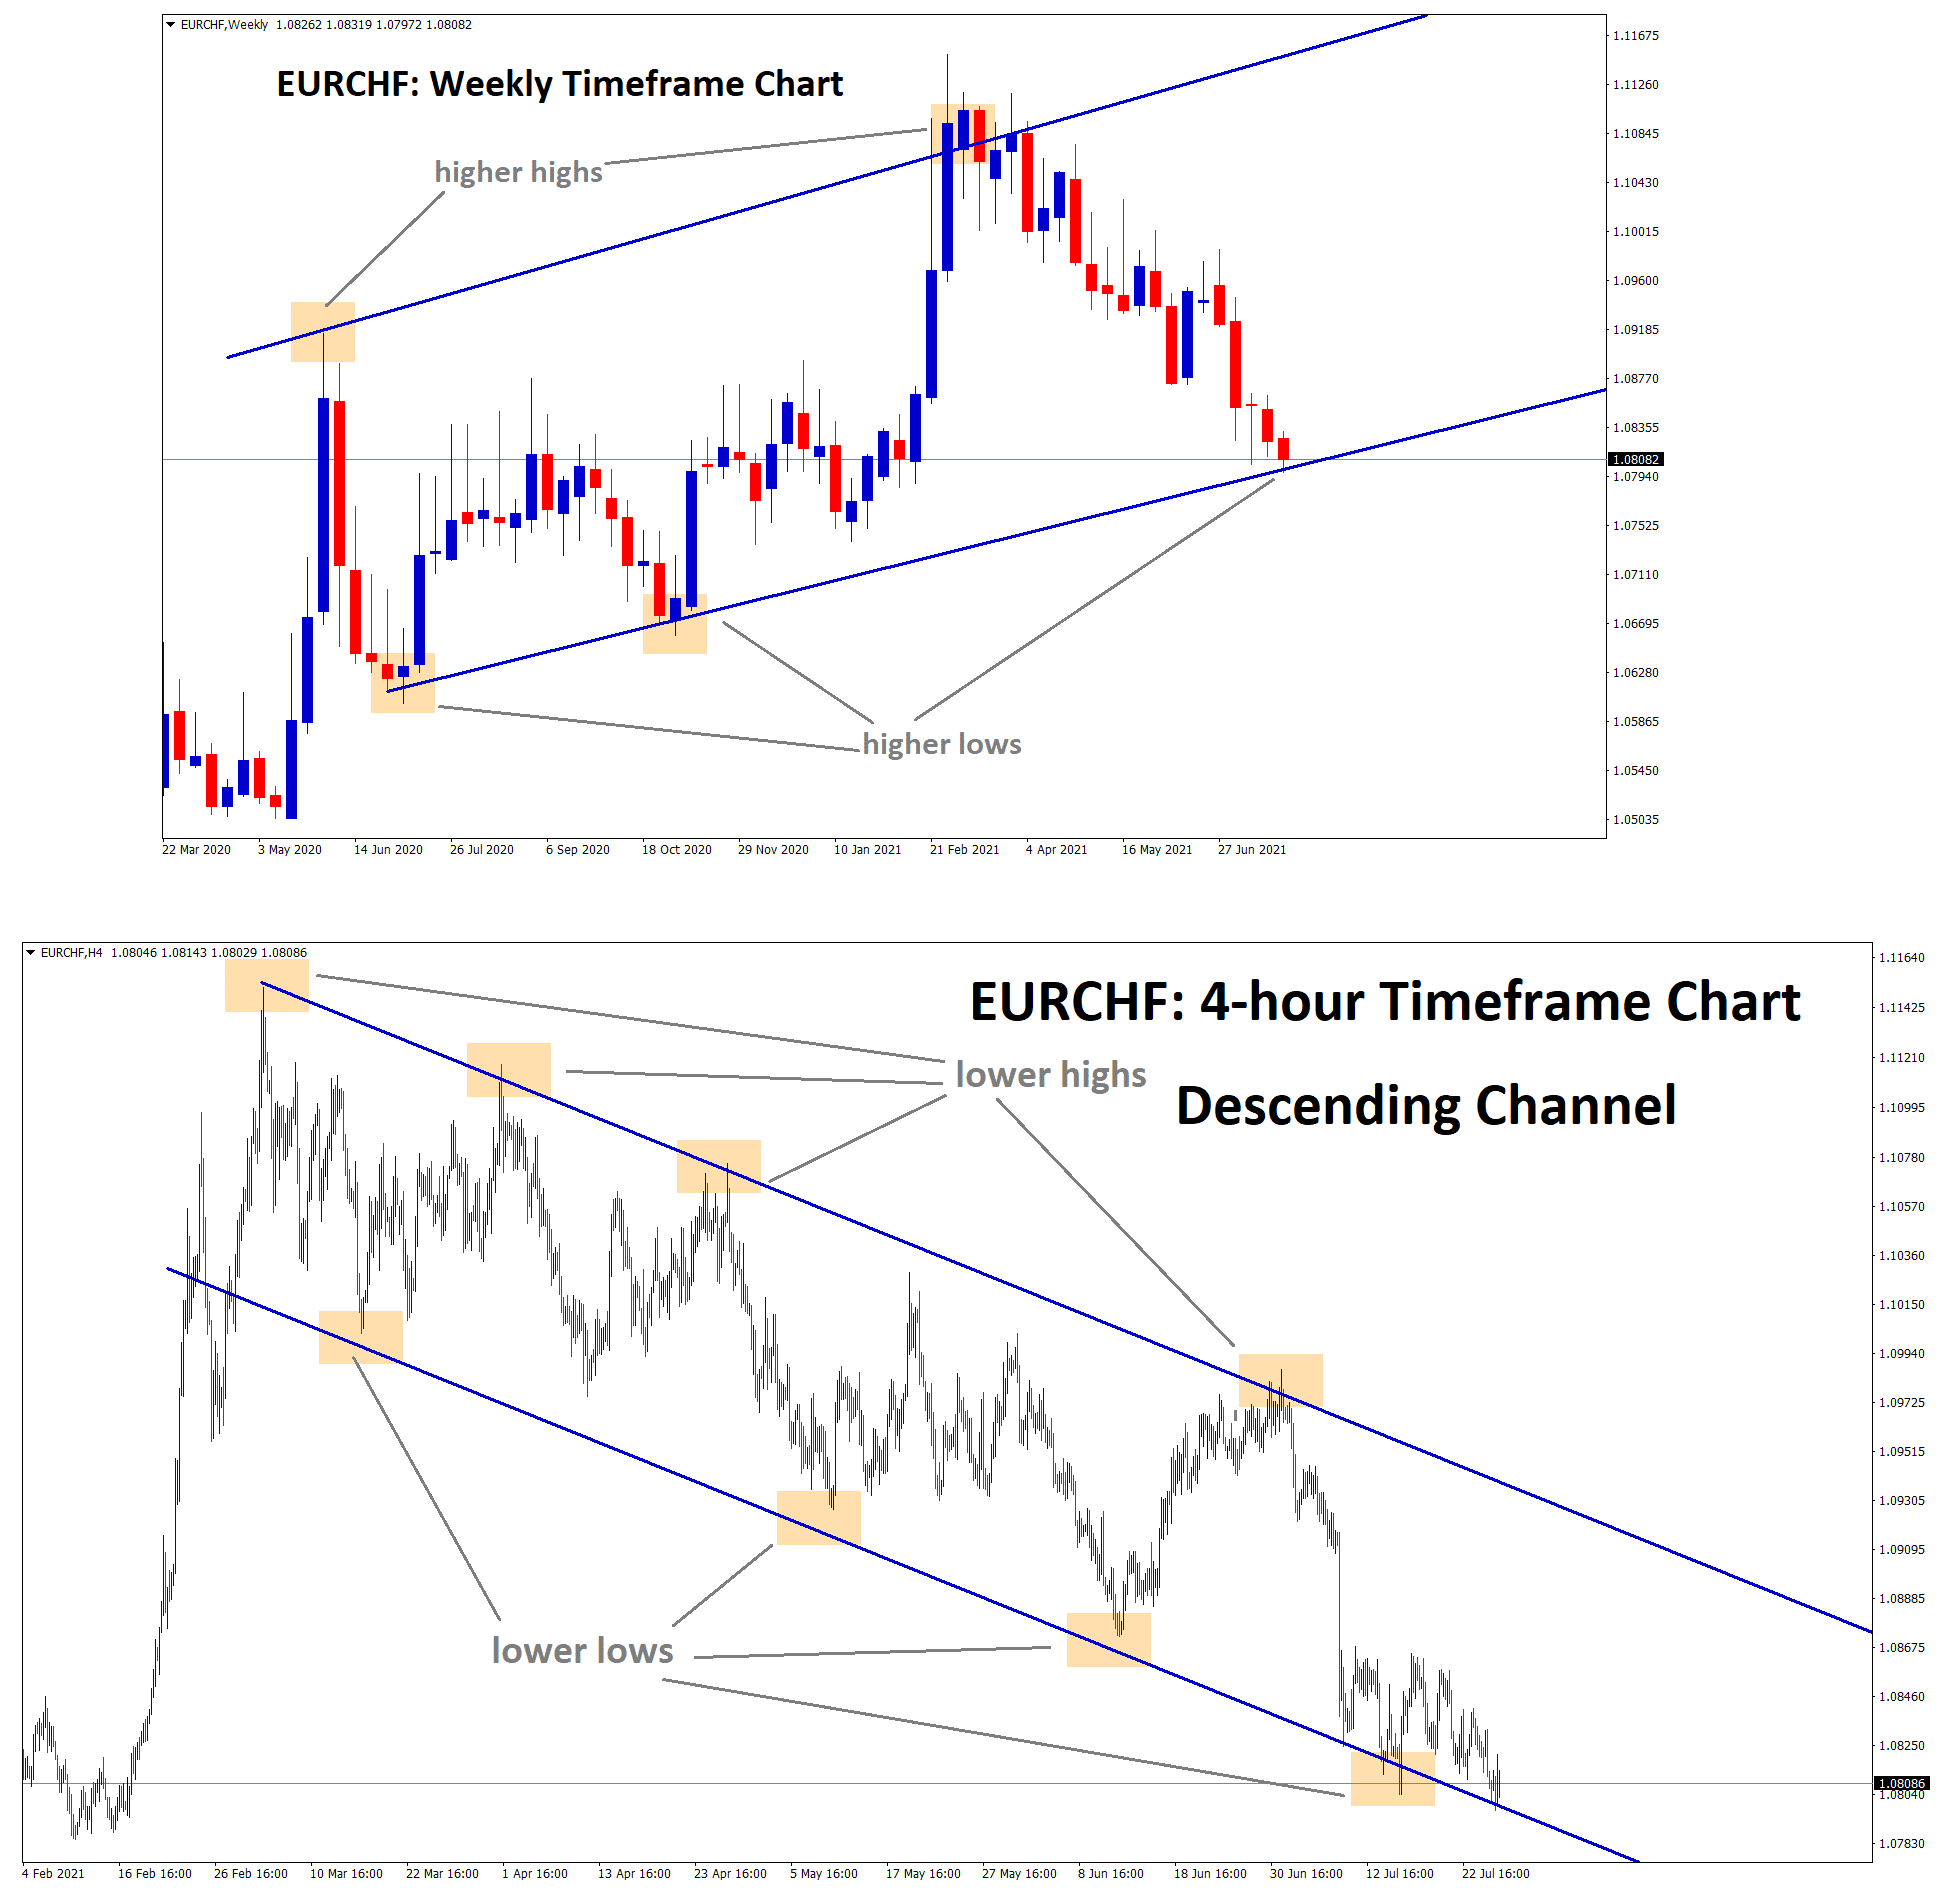 EURCHF hits the higher low level of an Uptrend line and lower low level of Descending channel